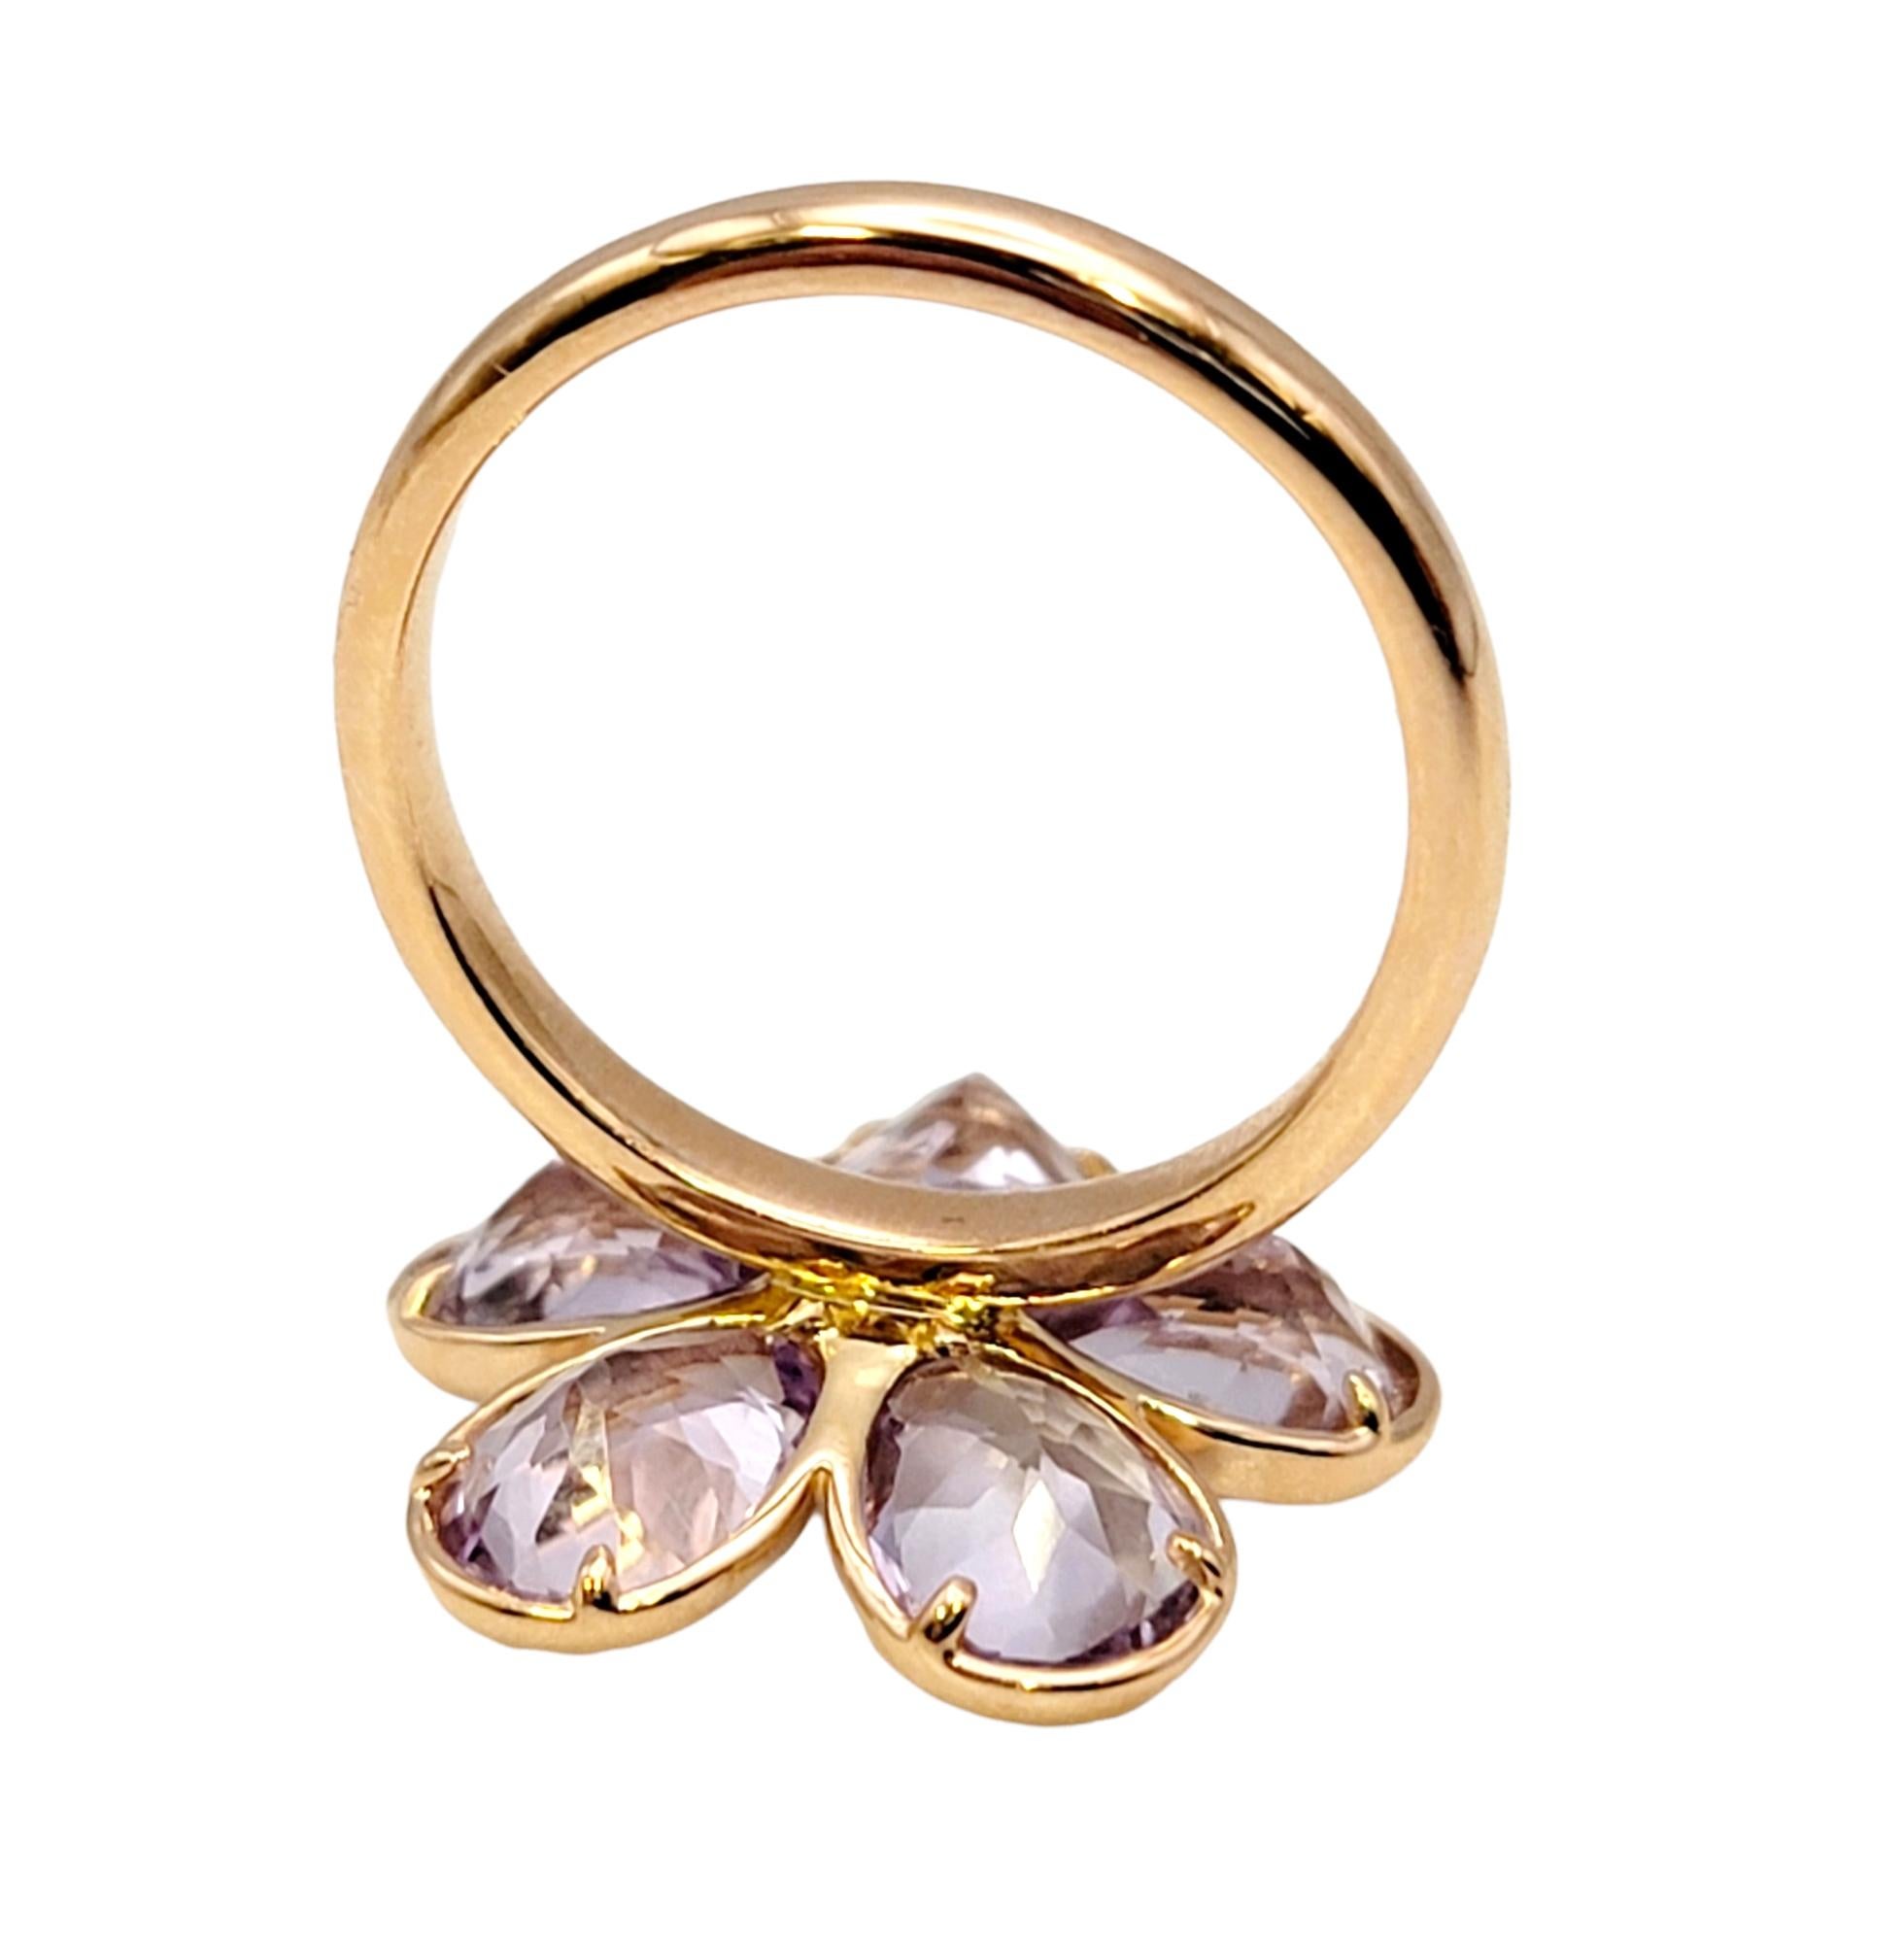 Women's Tiffany & Co. Amethyst and Diamond Sparklers Flower Ring in 18 Karat Rose Gold